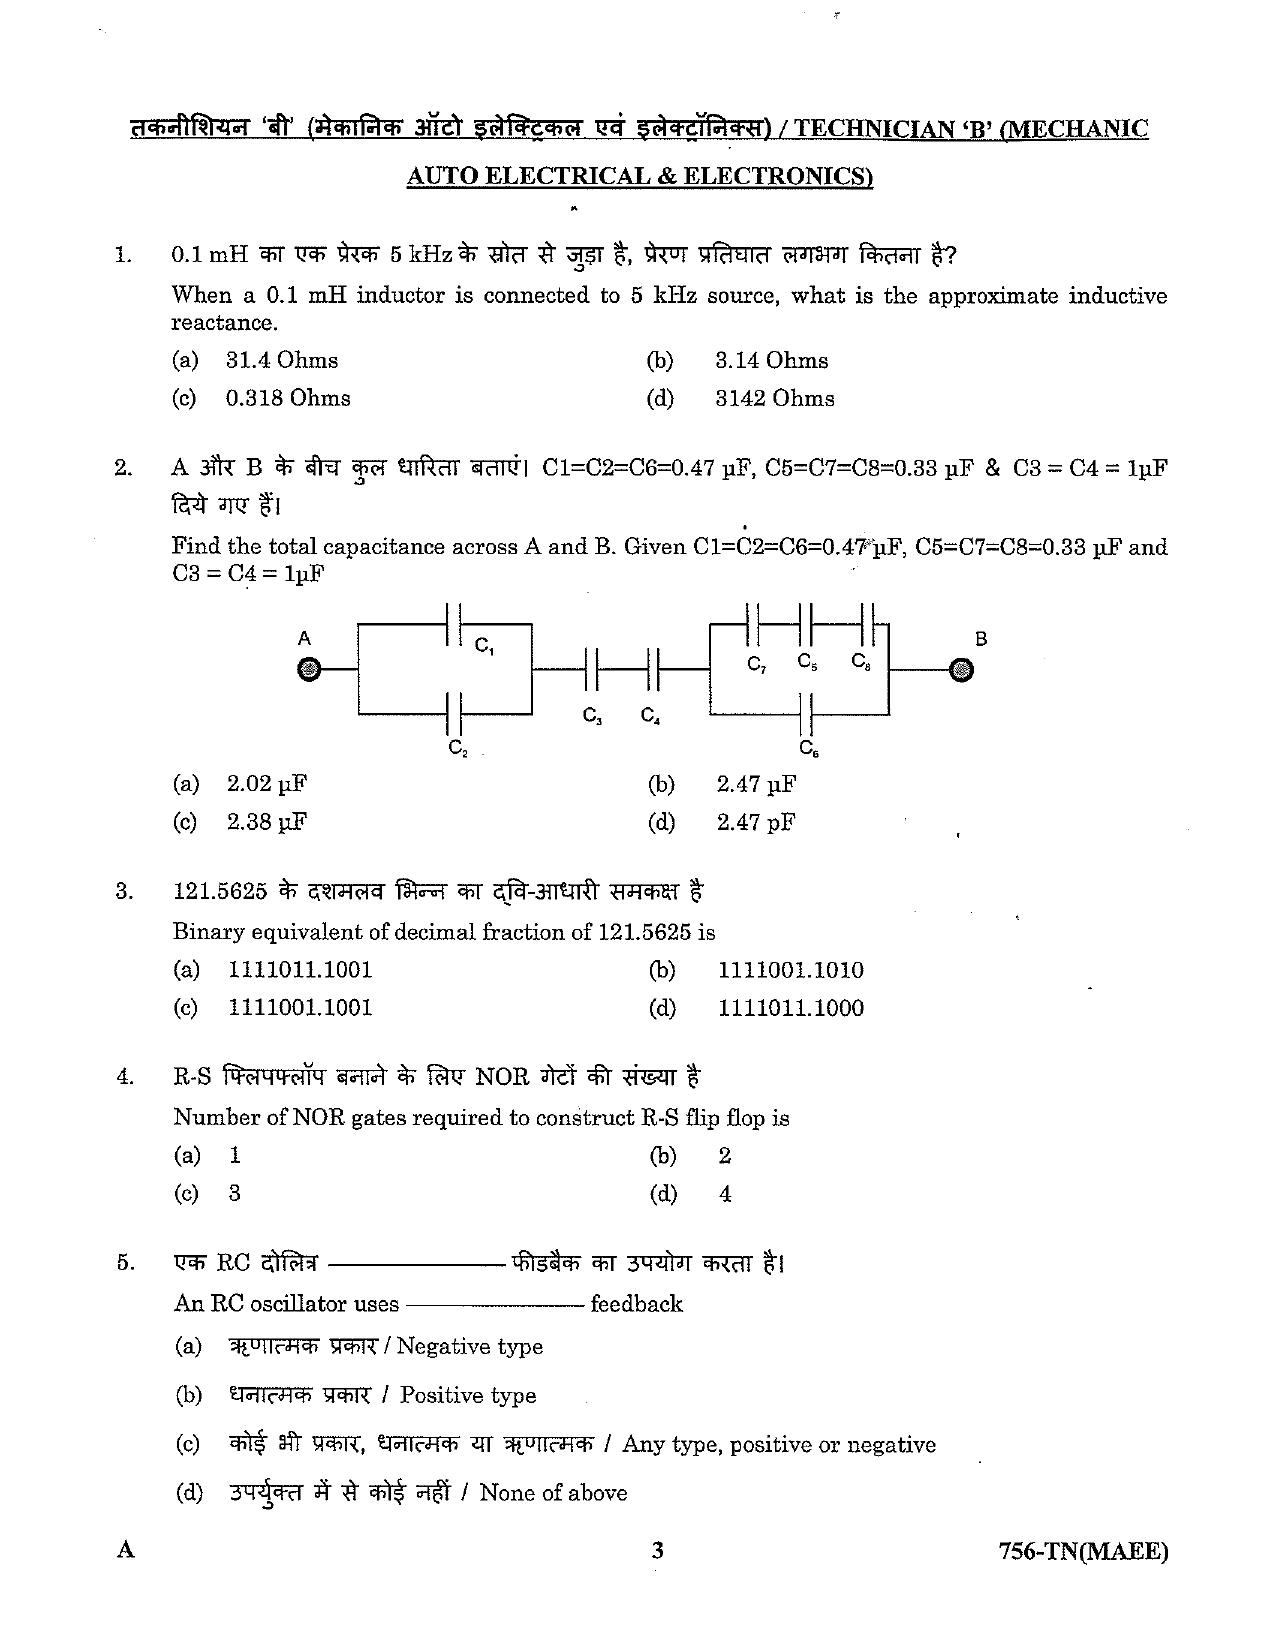 LPSC Technician ‘B’ (Mechanic Auto Electrical and Electronics) 2023 Question Paper - Page 3